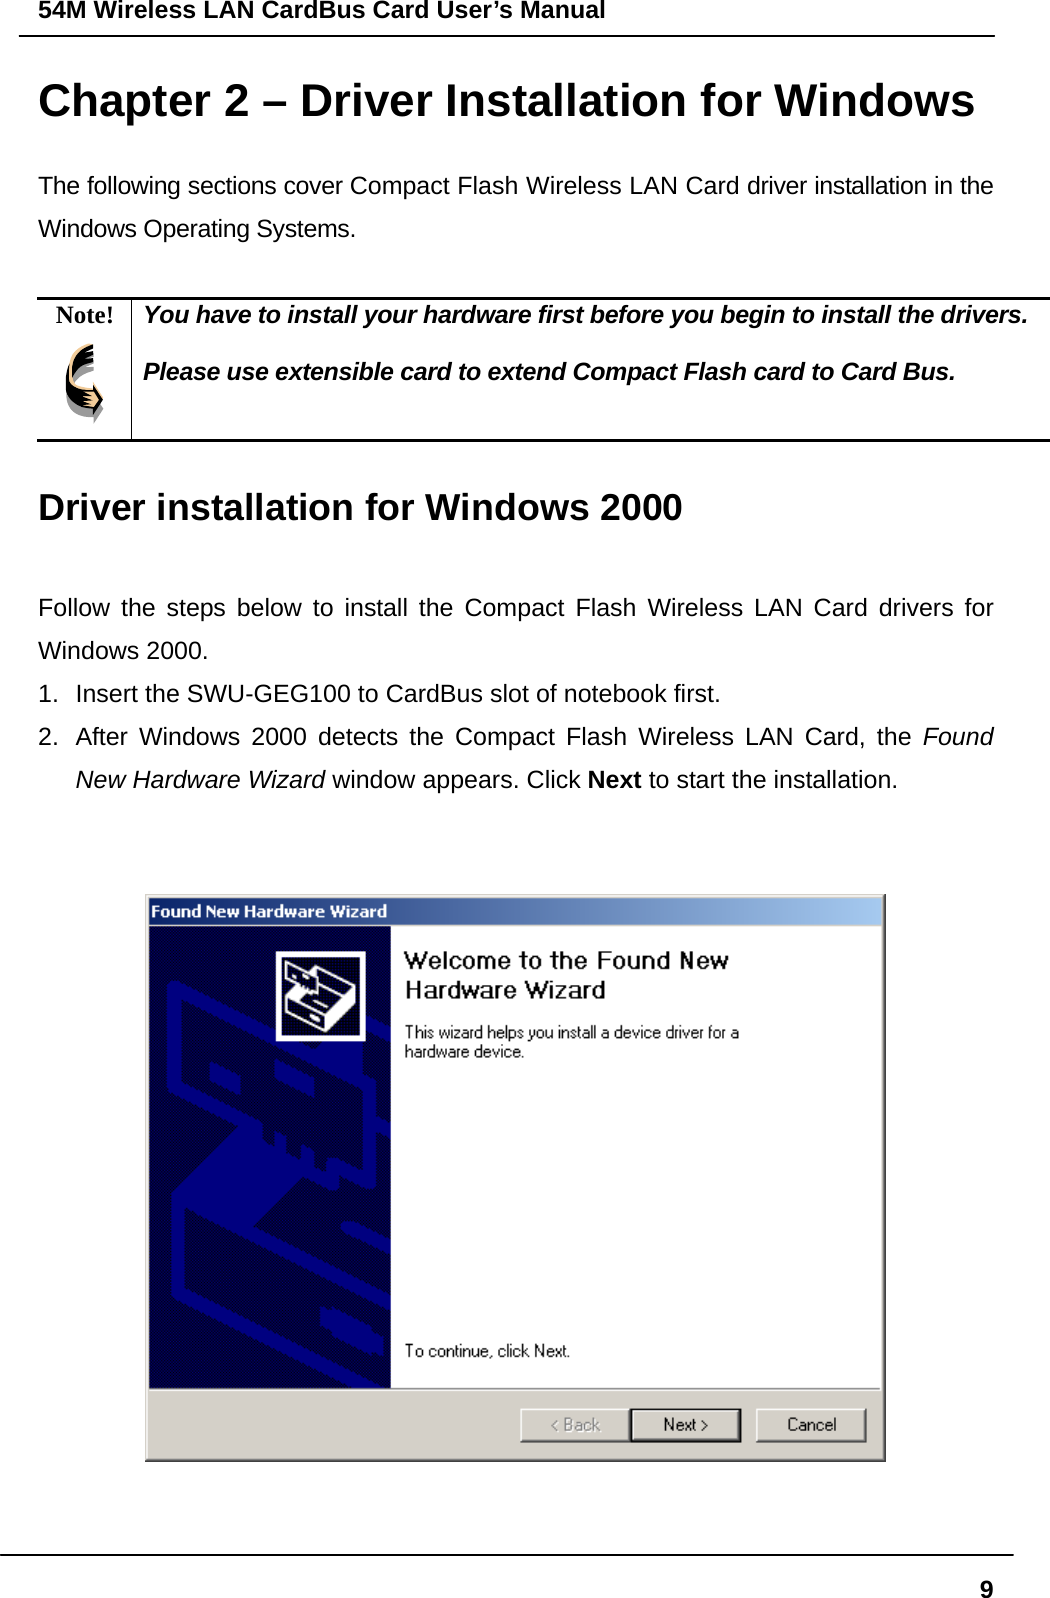 54M Wireless LAN CardBus Card User’s Manual  9Chapter 2 – Driver Installation for Windows The following sections cover Compact Flash Wireless LAN Card driver installation in the Windows Operating Systems.  Note!  You have to install your hardware first before you begin to install the drivers.  Please use extensible card to extend Compact Flash card to Card Bus.  Driver installation for Windows 2000  Follow the steps below to install the Compact Flash Wireless LAN Card drivers for Windows 2000. 1.  Insert the SWU-GEG100 to CardBus slot of notebook first.   2.  After Windows 2000 detects the Compact Flash Wireless LAN Card, the Found New Hardware Wizard window appears. Click Next to start the installation.      